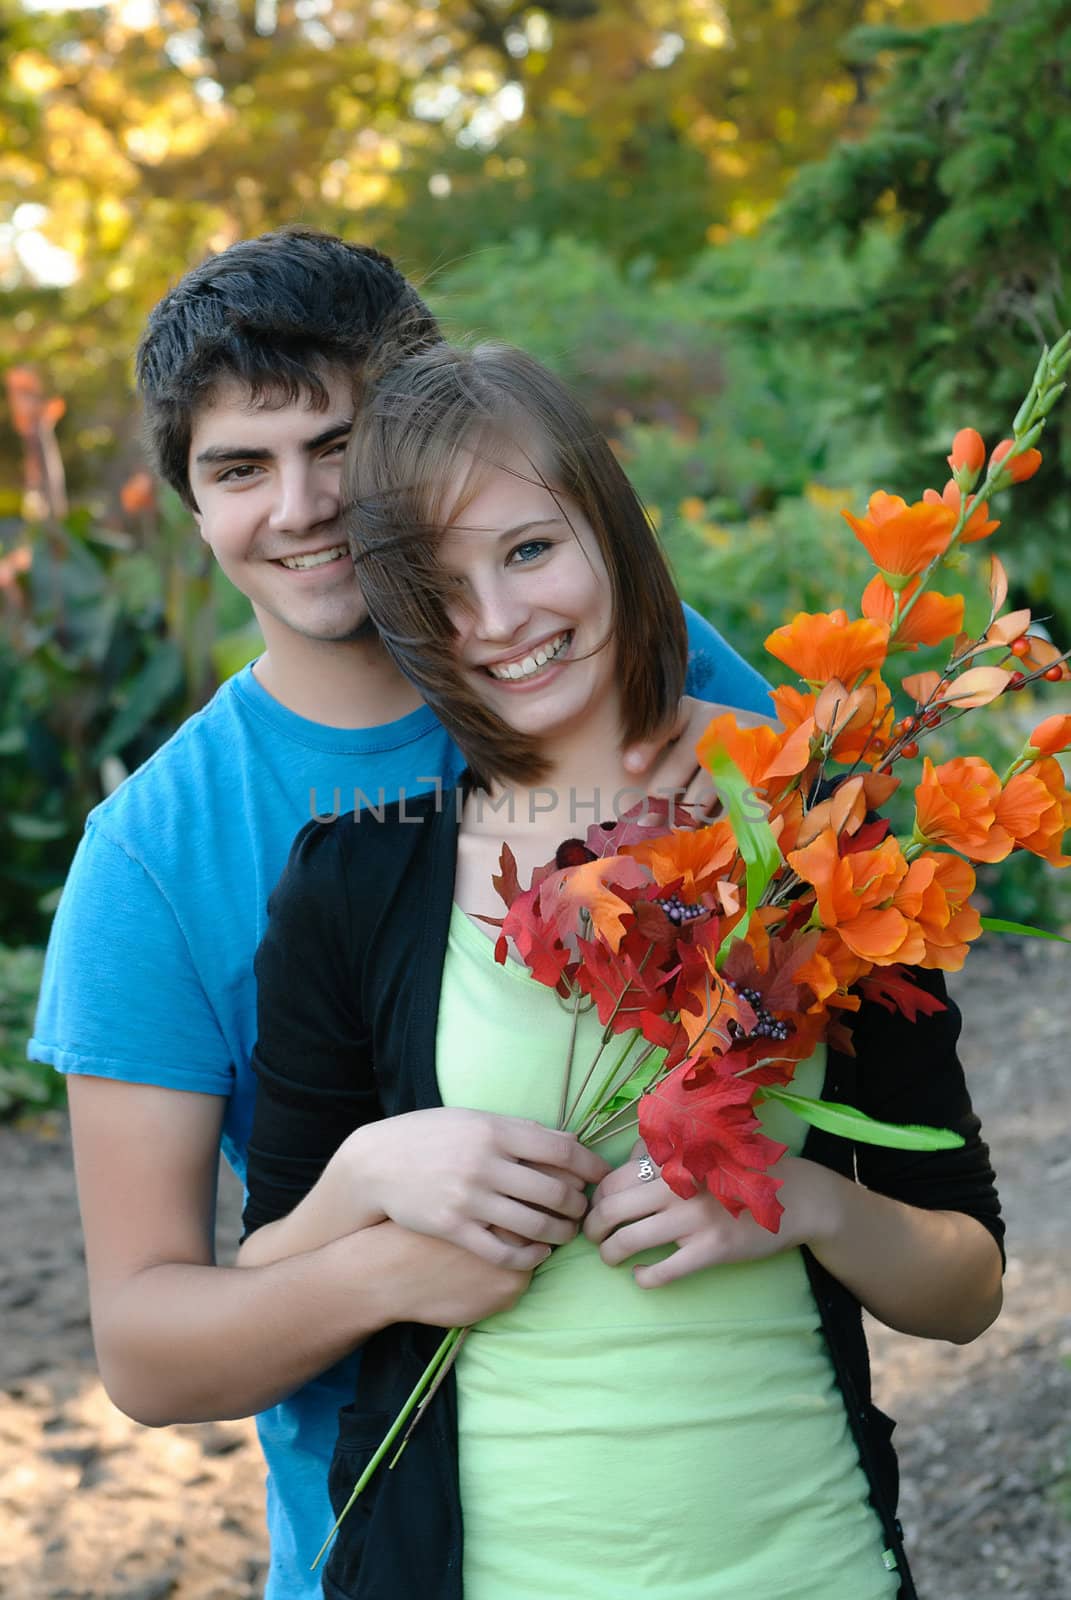 A young couple smiling during the fall